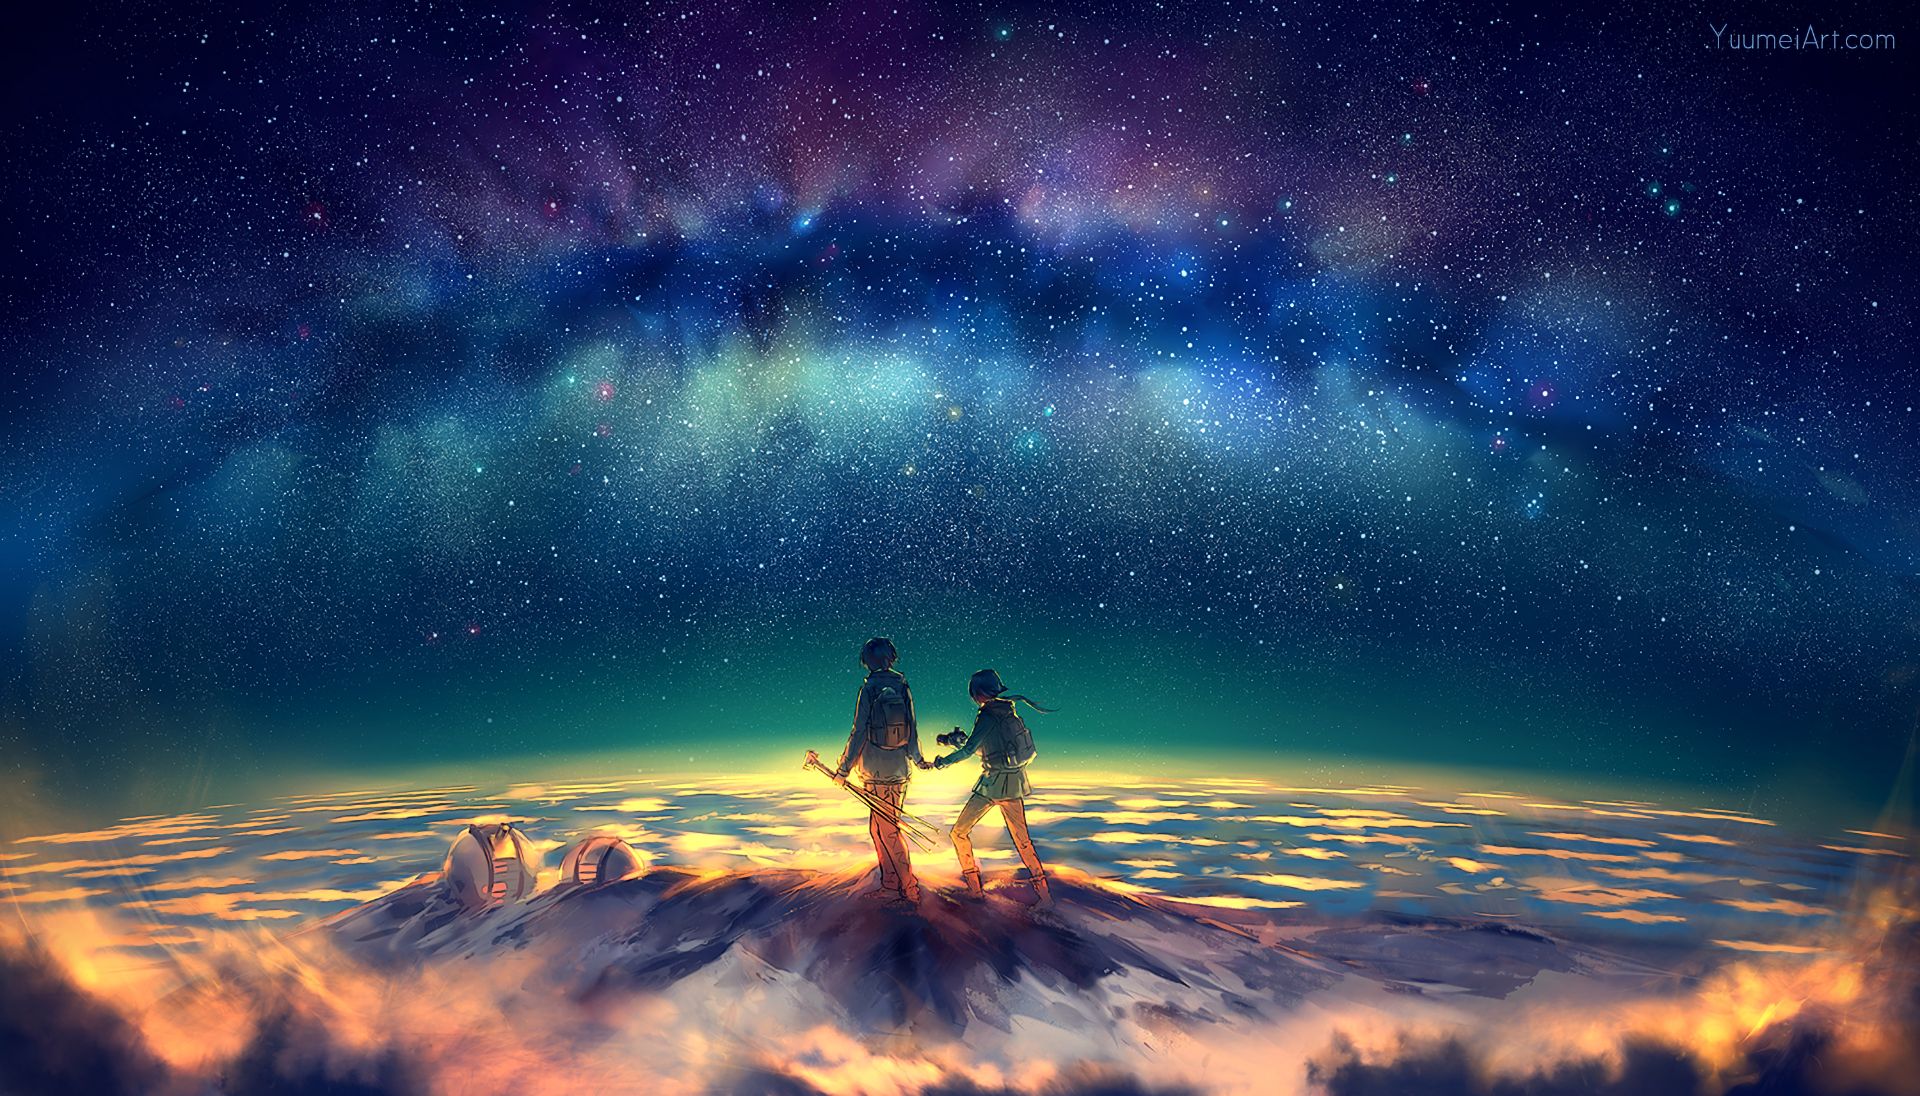 The Heavens and Us by Yuumei